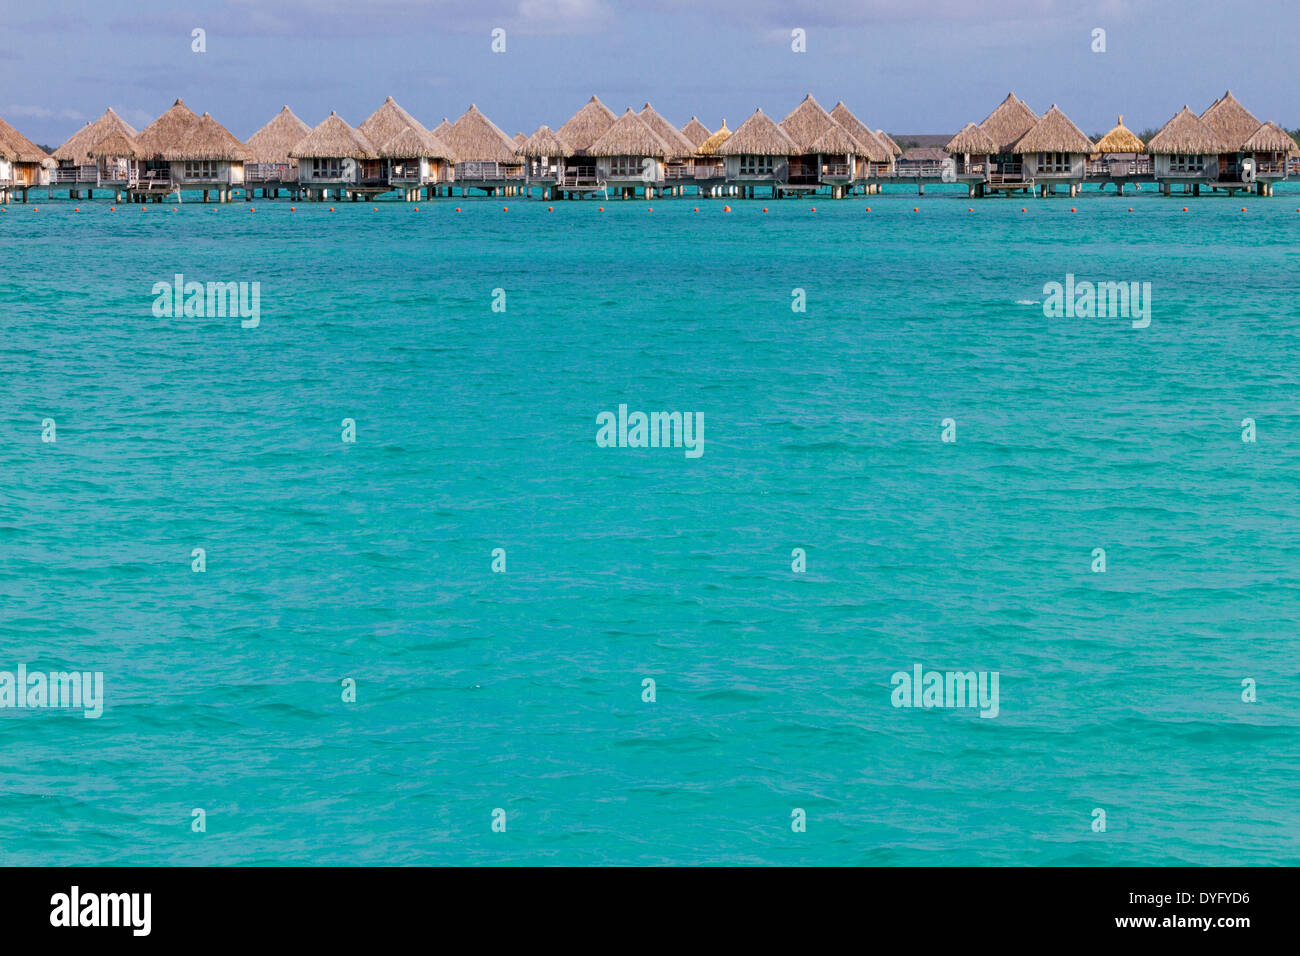 Overwater bungalows over turquoise water in Bora Bora in French Polynesia Stock Photo